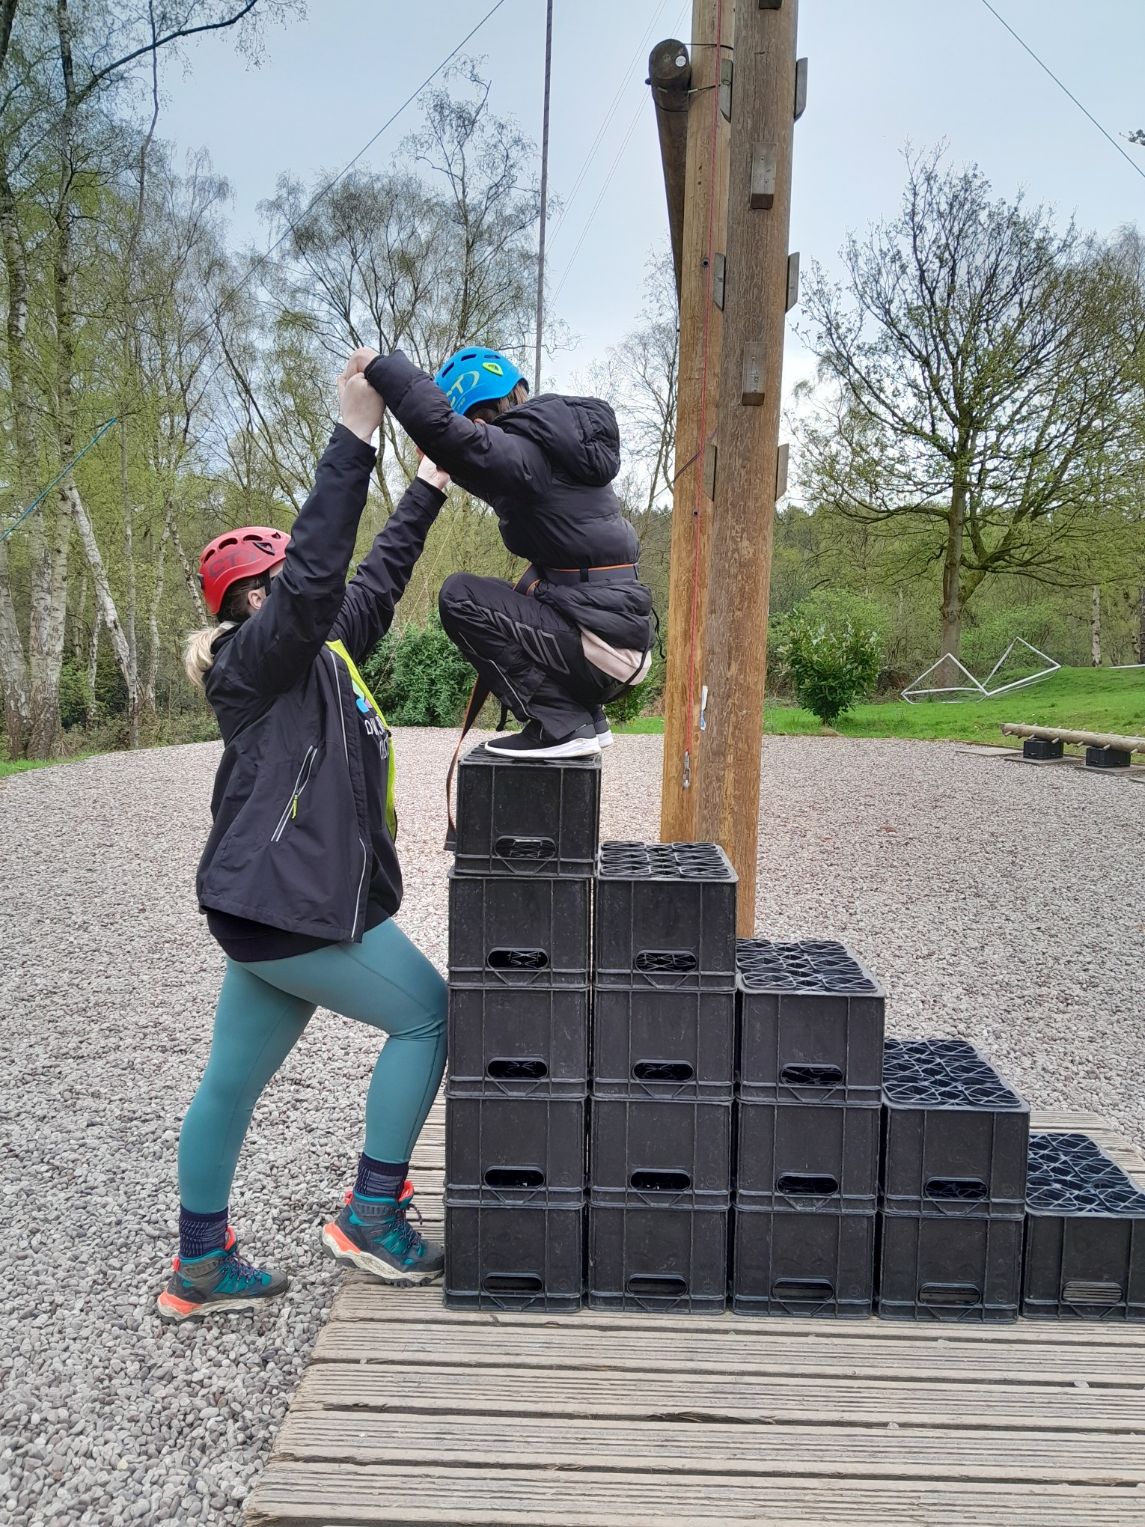 young person with Down syndrome jumping off plastic stacking crates with the some help 